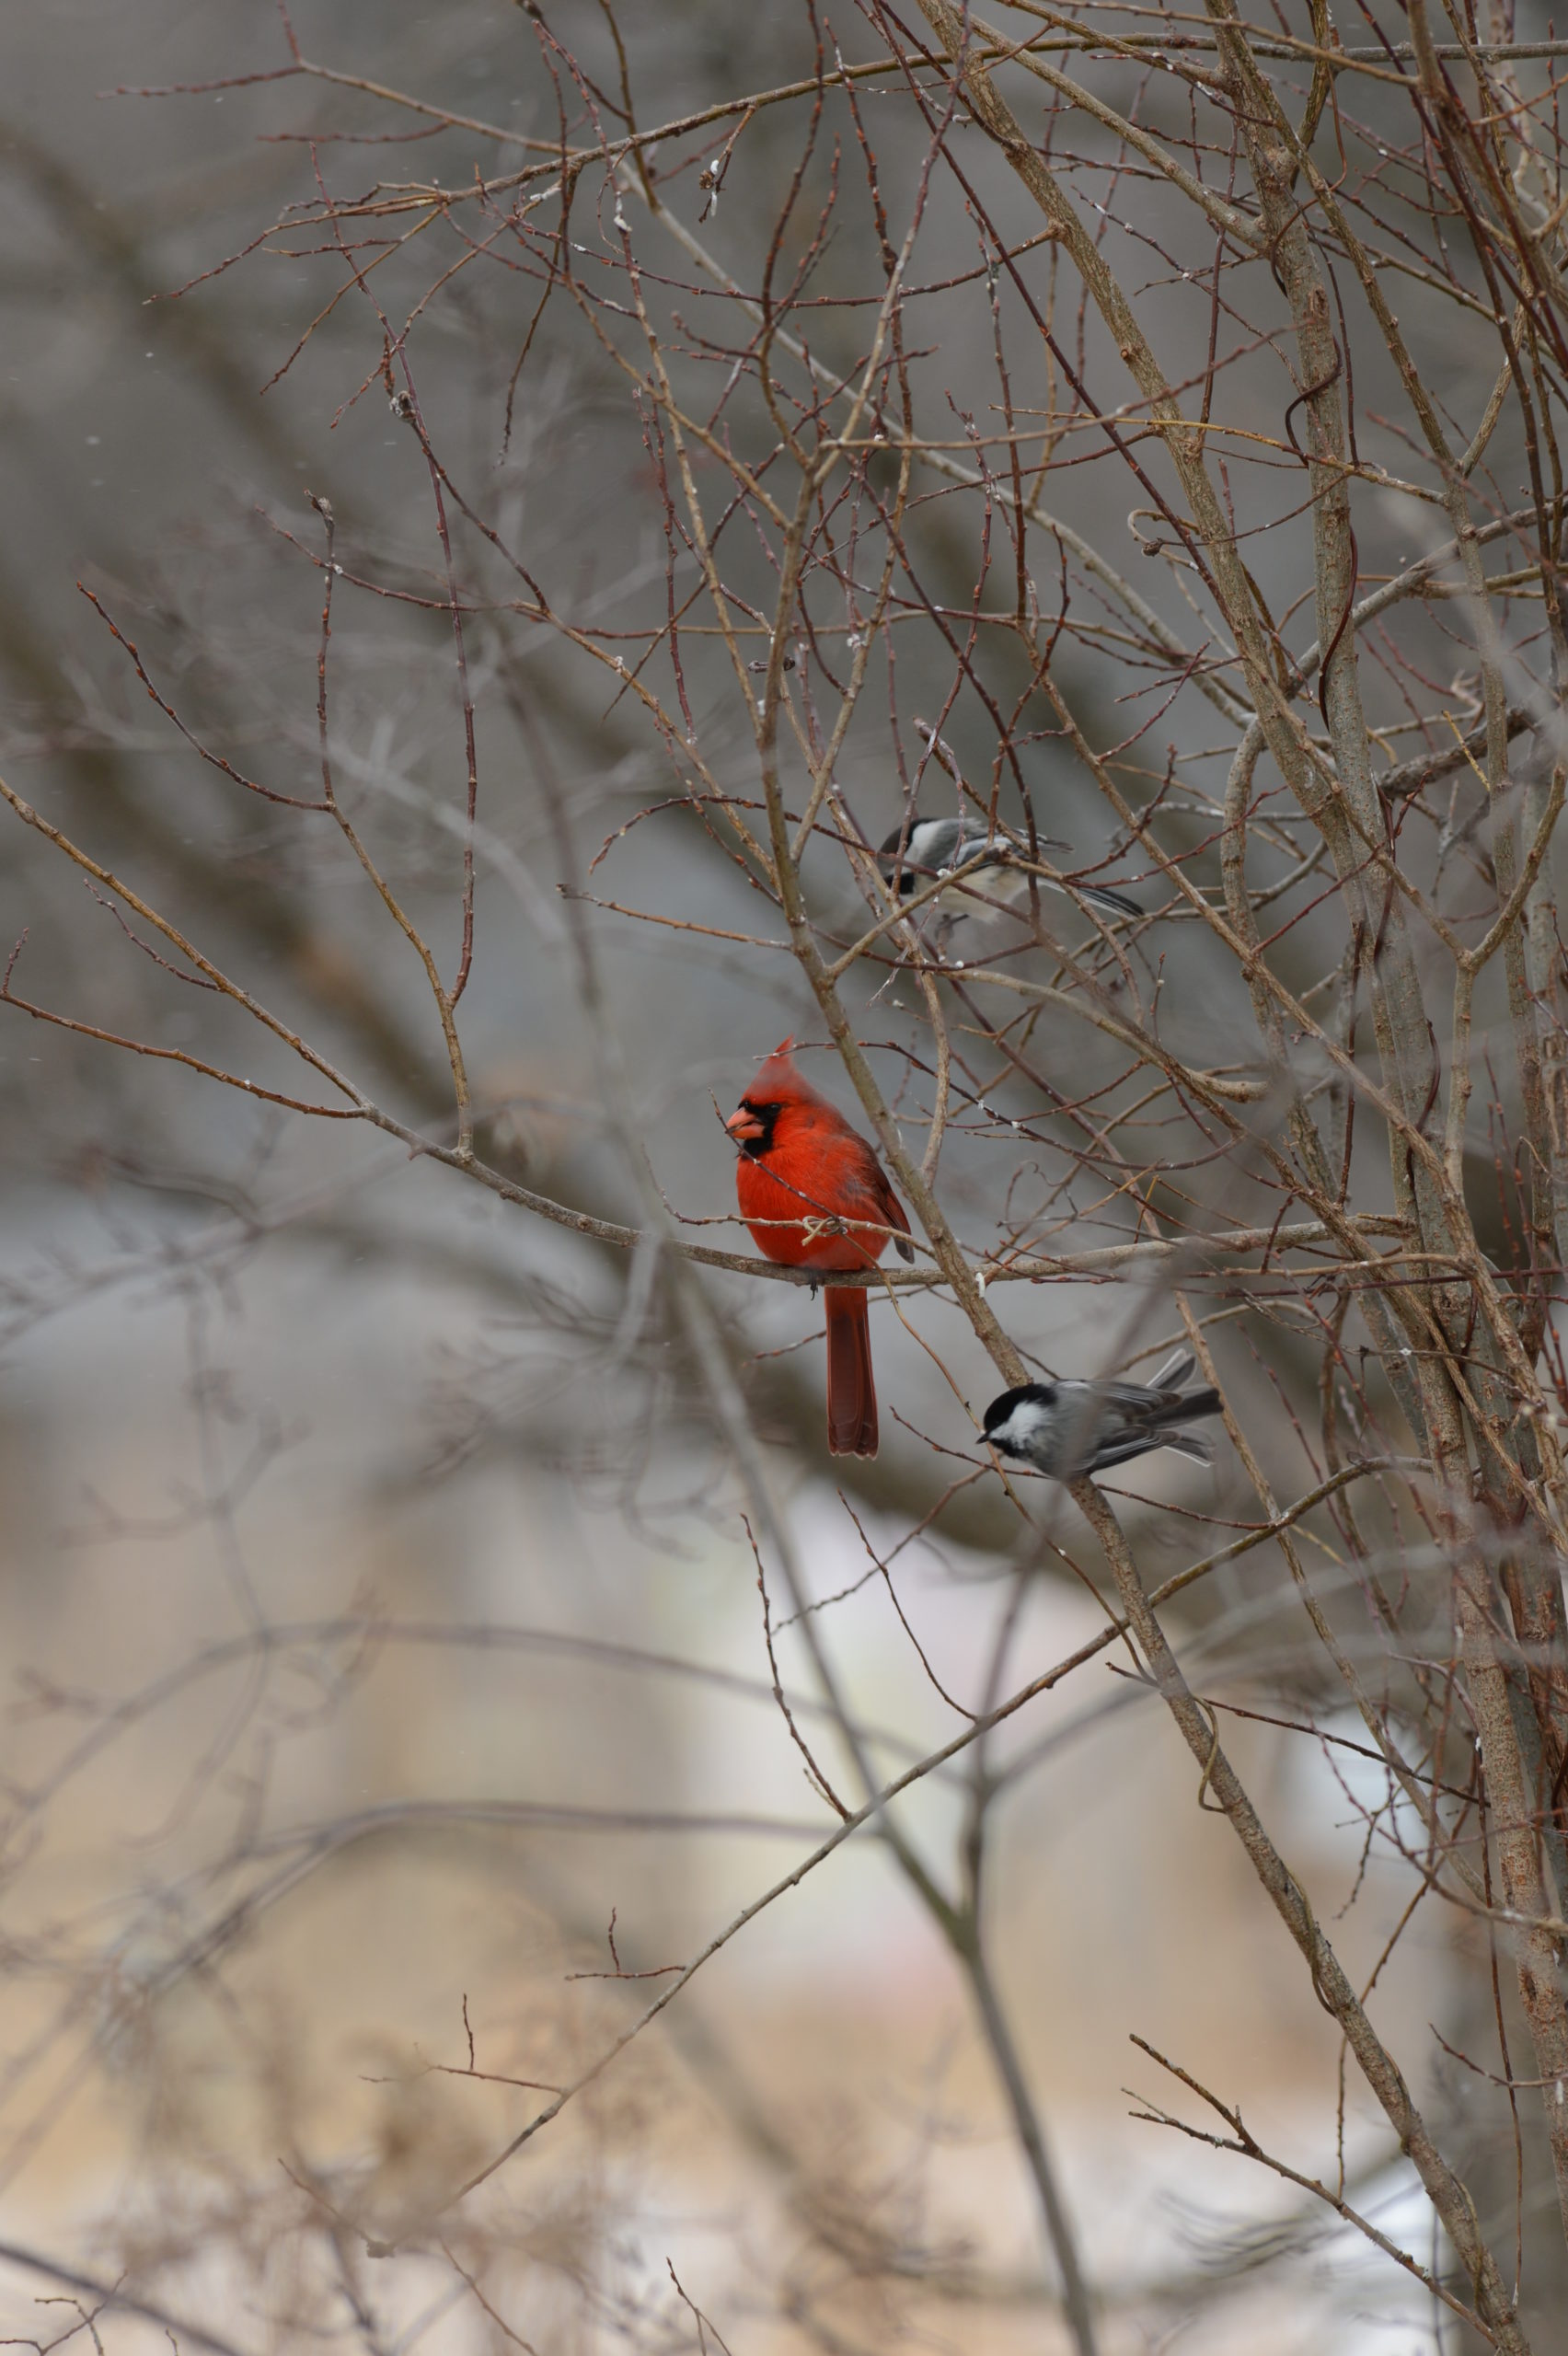 view from a distance of a cardinal and 2 chickadees in a bare tree in winter